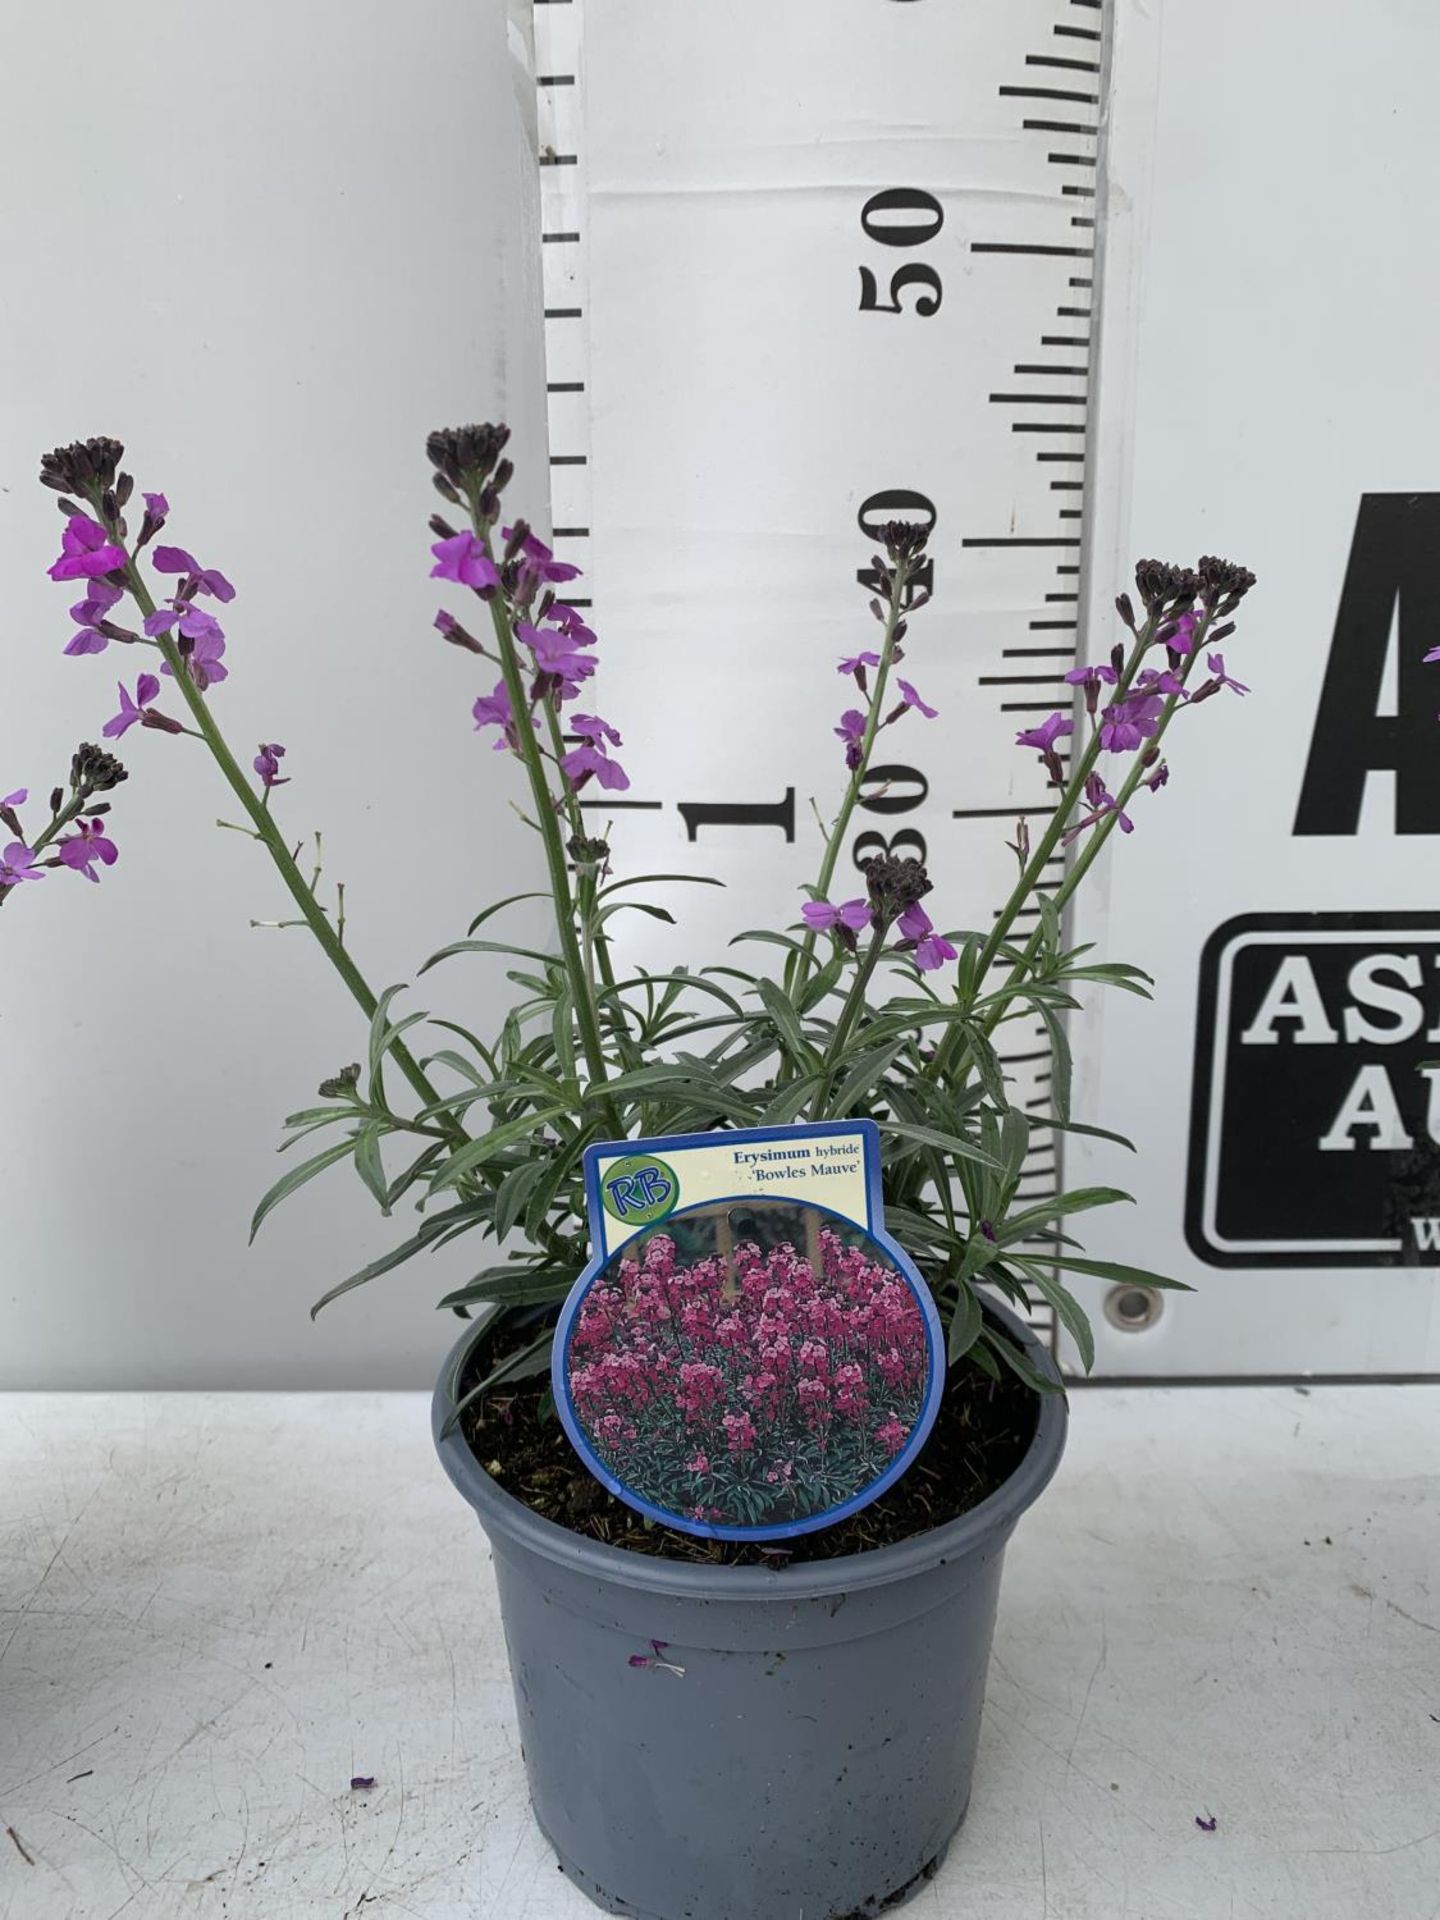 SIX ERYSIMUM BOWLES MAUVE IN 2 LTR POTS 40-50CM TALL TO BE SOLD FOR THE SIX PLUS VAT - Image 3 of 5